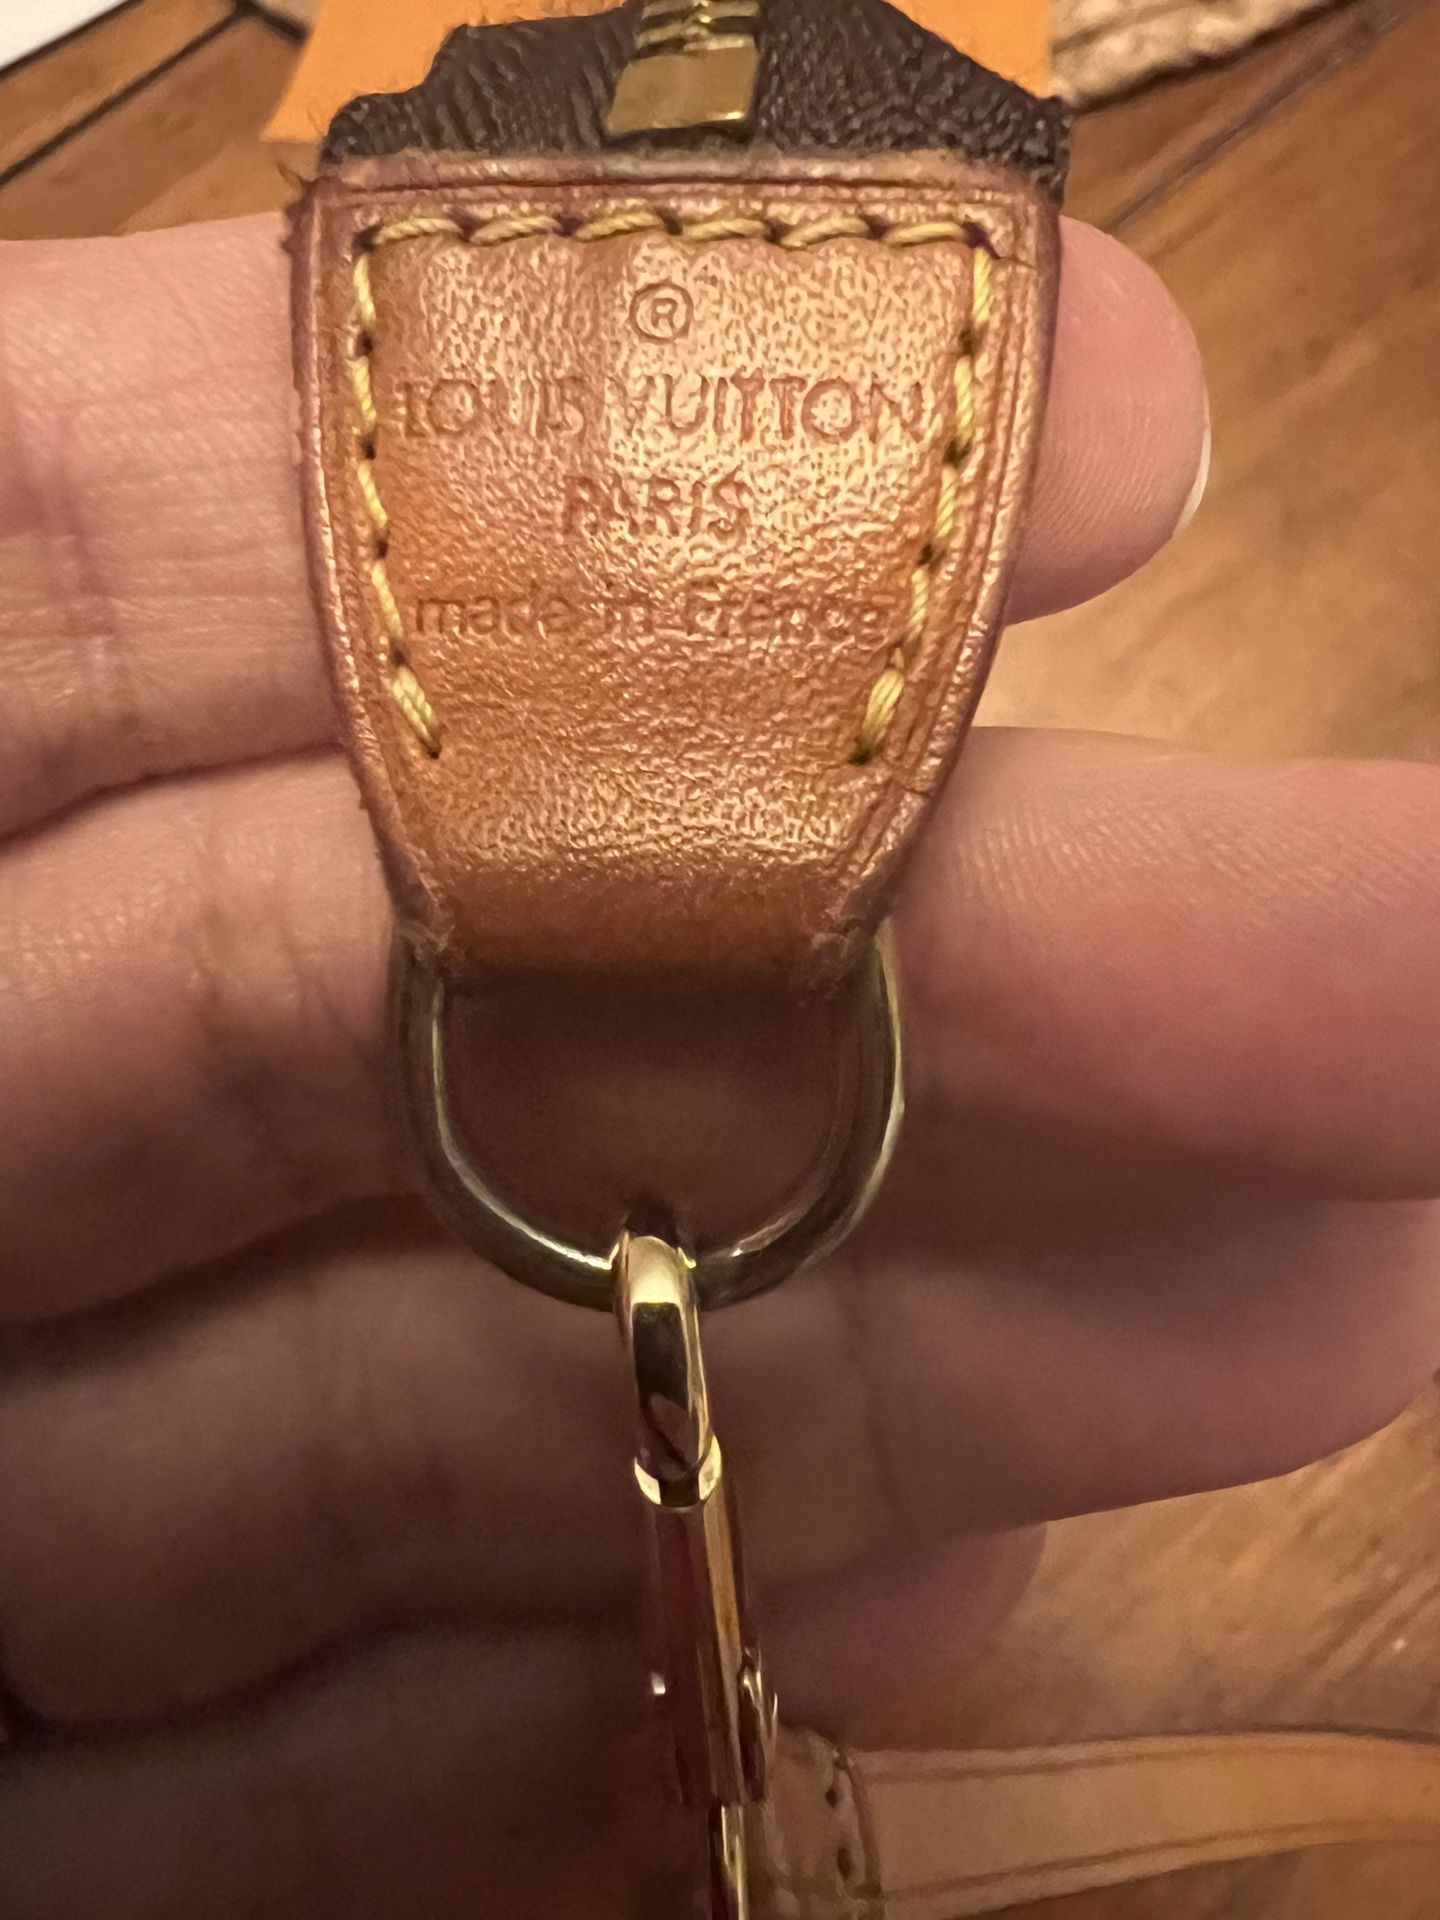 LV Bucket Bag for Sale in New York, NY - OfferUp